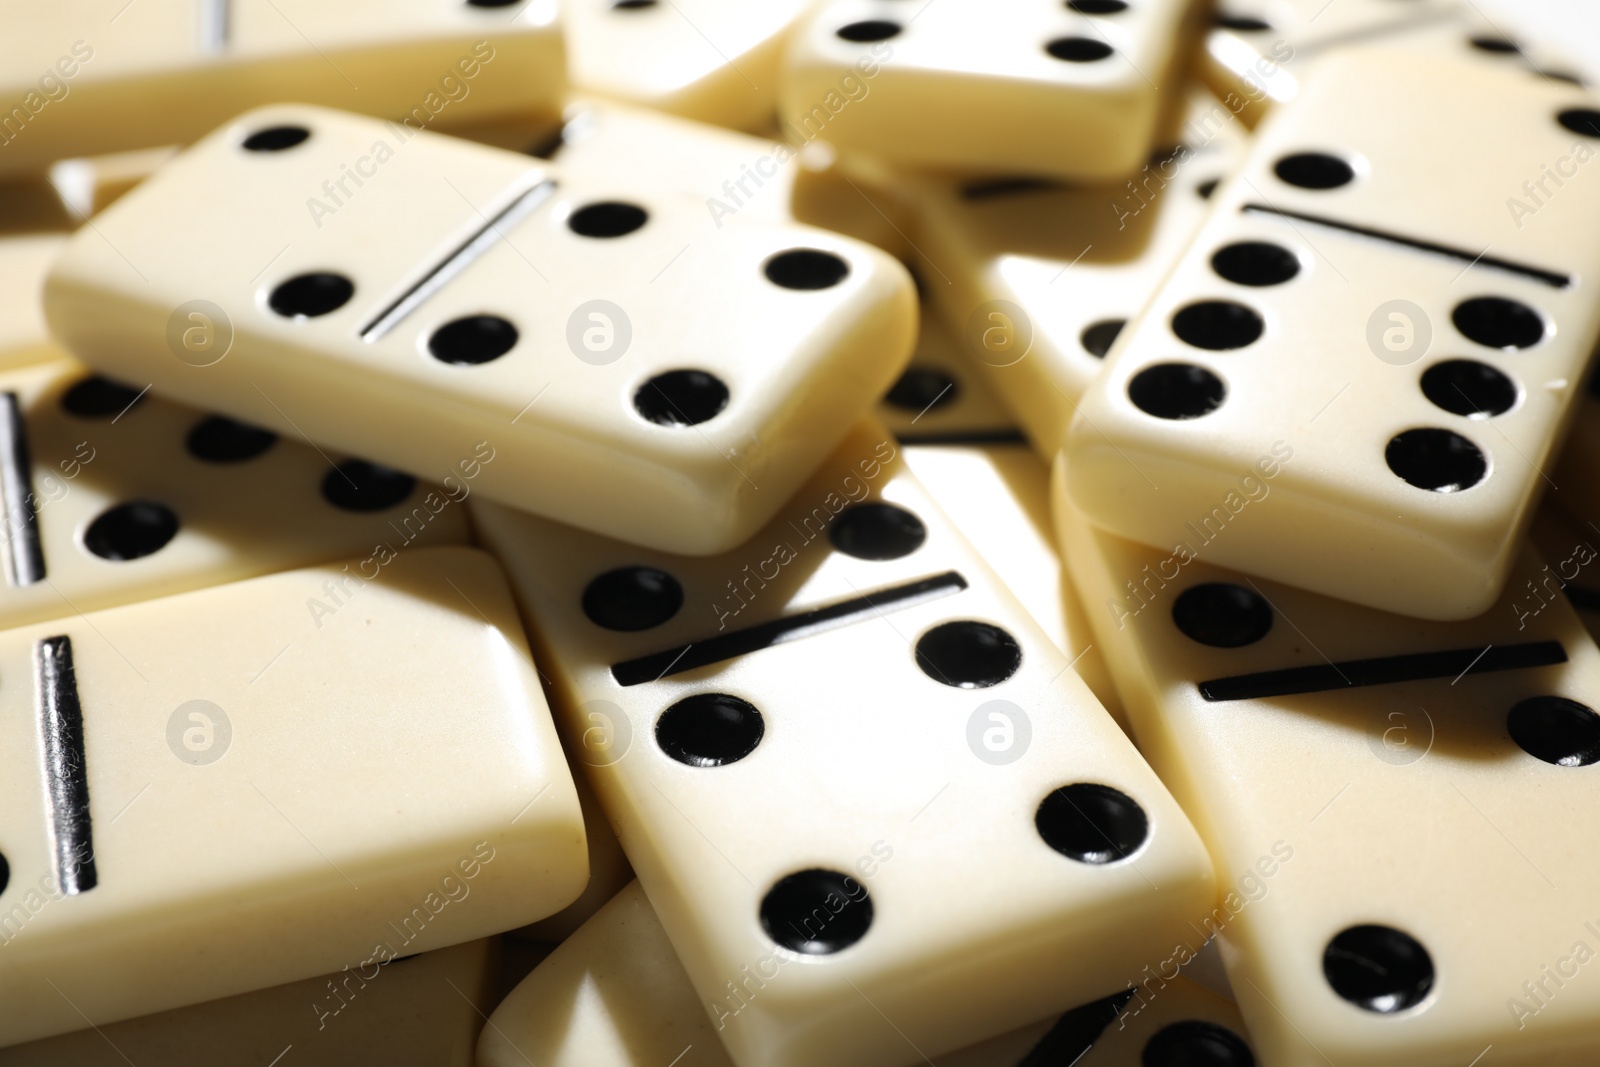 Photo of Set of classic domino tiles as background, closeup